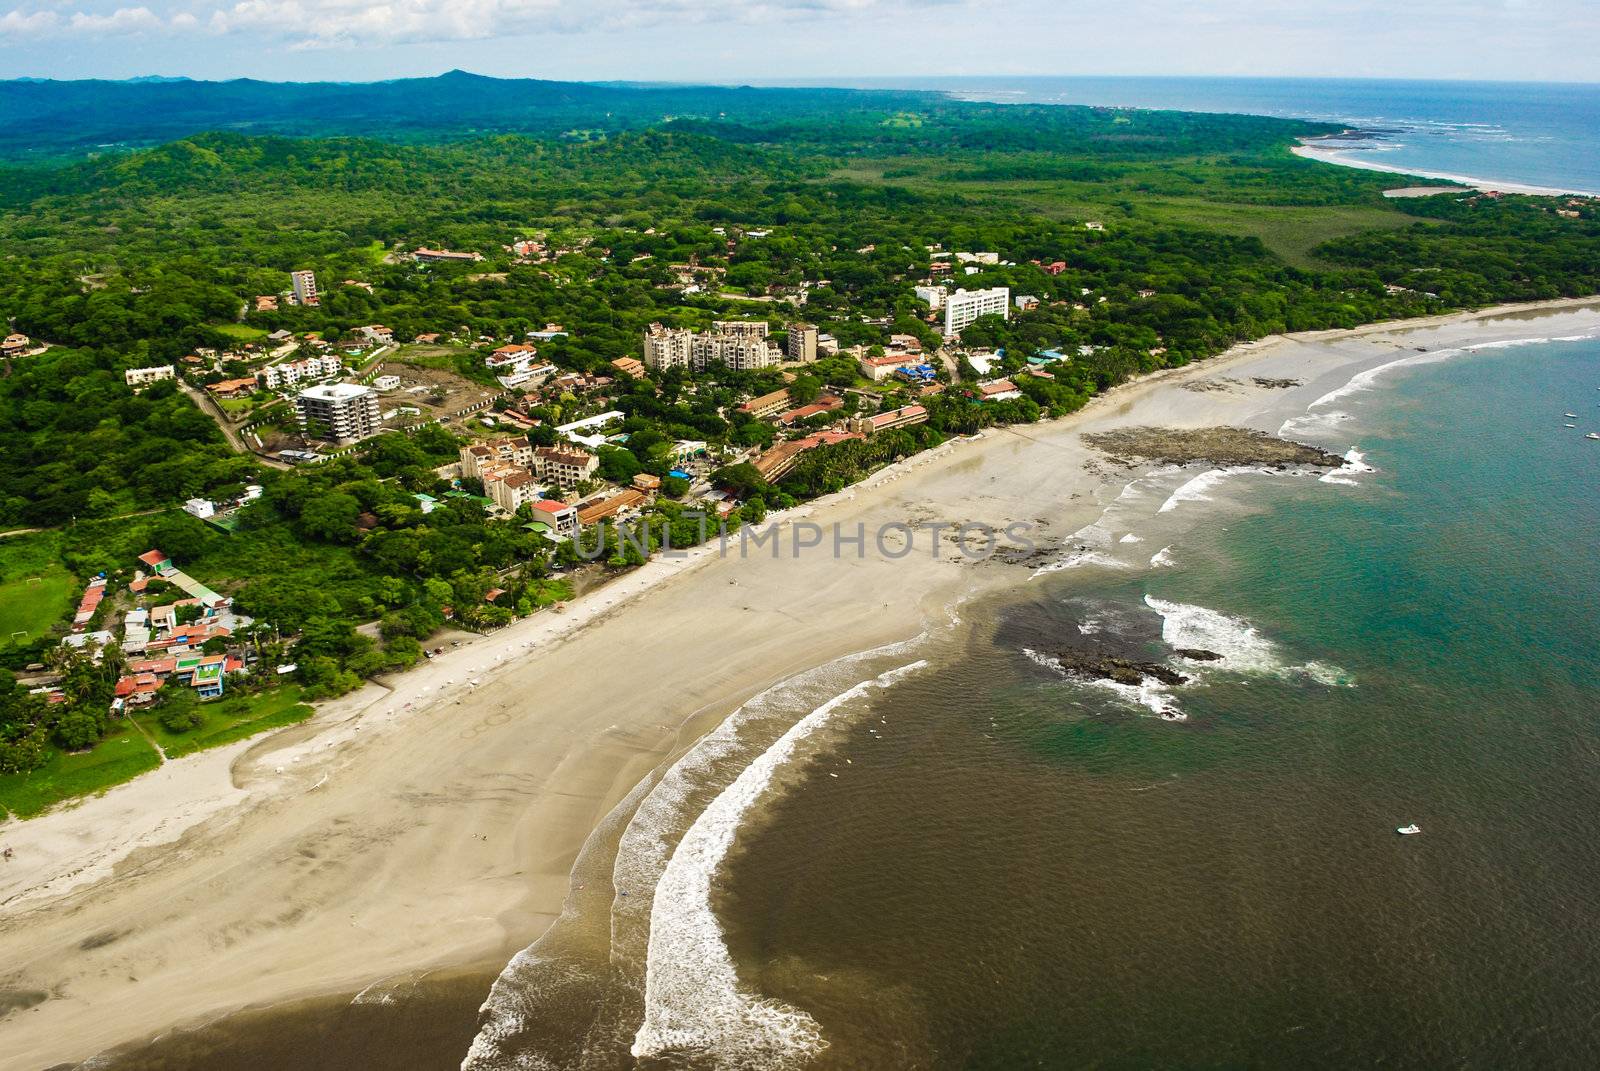 Costa Rica Beach from the Air by oliverjw